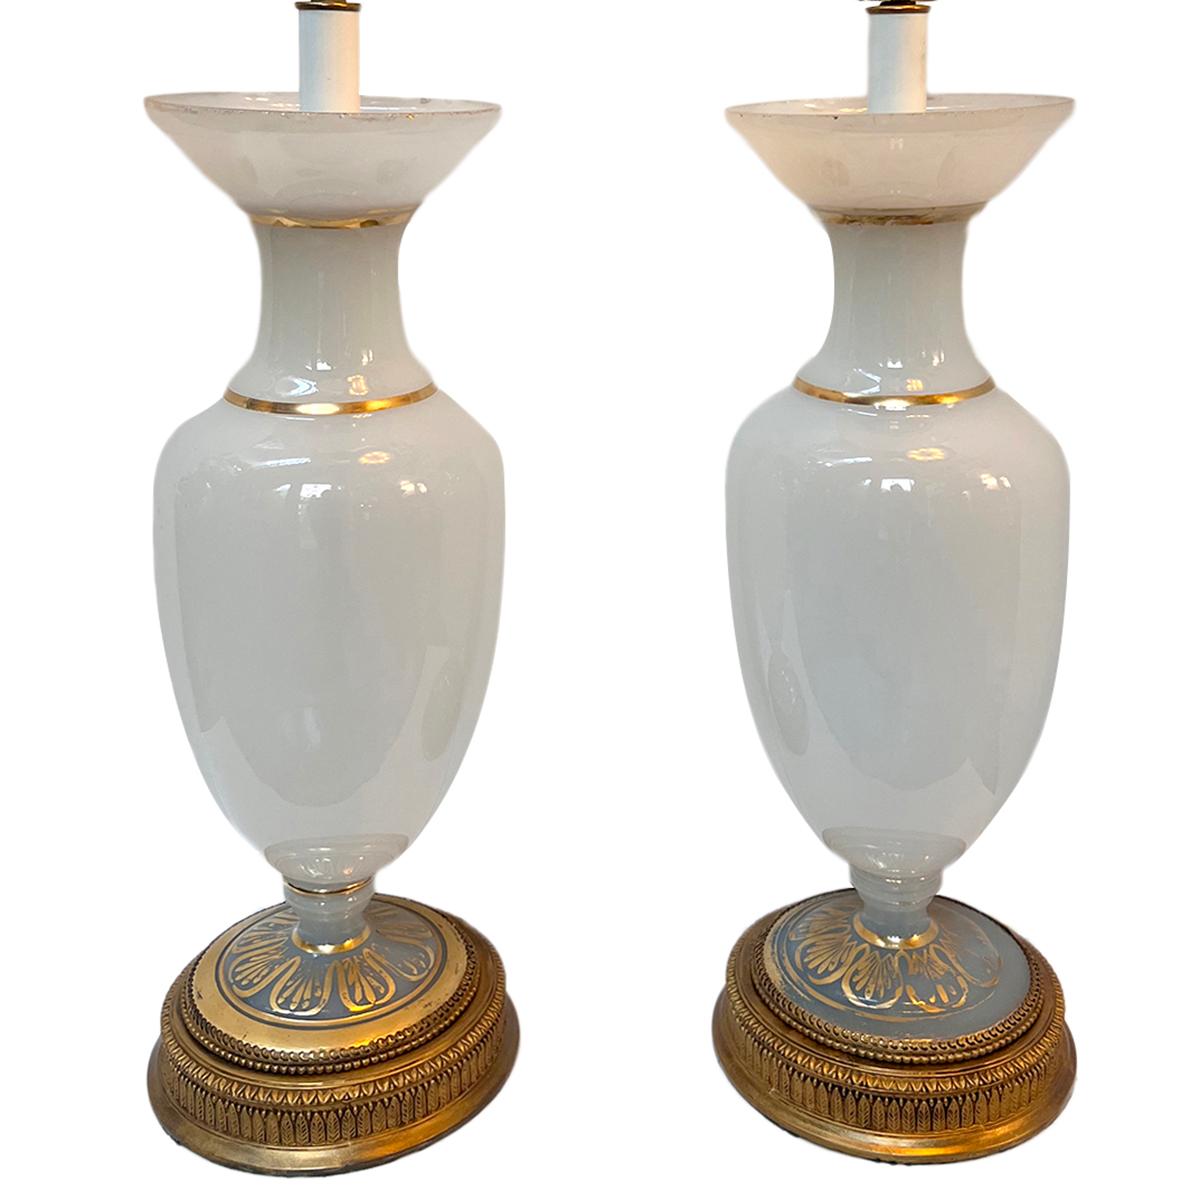 Pair of circa 1930's French opaline glass lamps with gilt details.

Measurements:
Height of body: 23.75